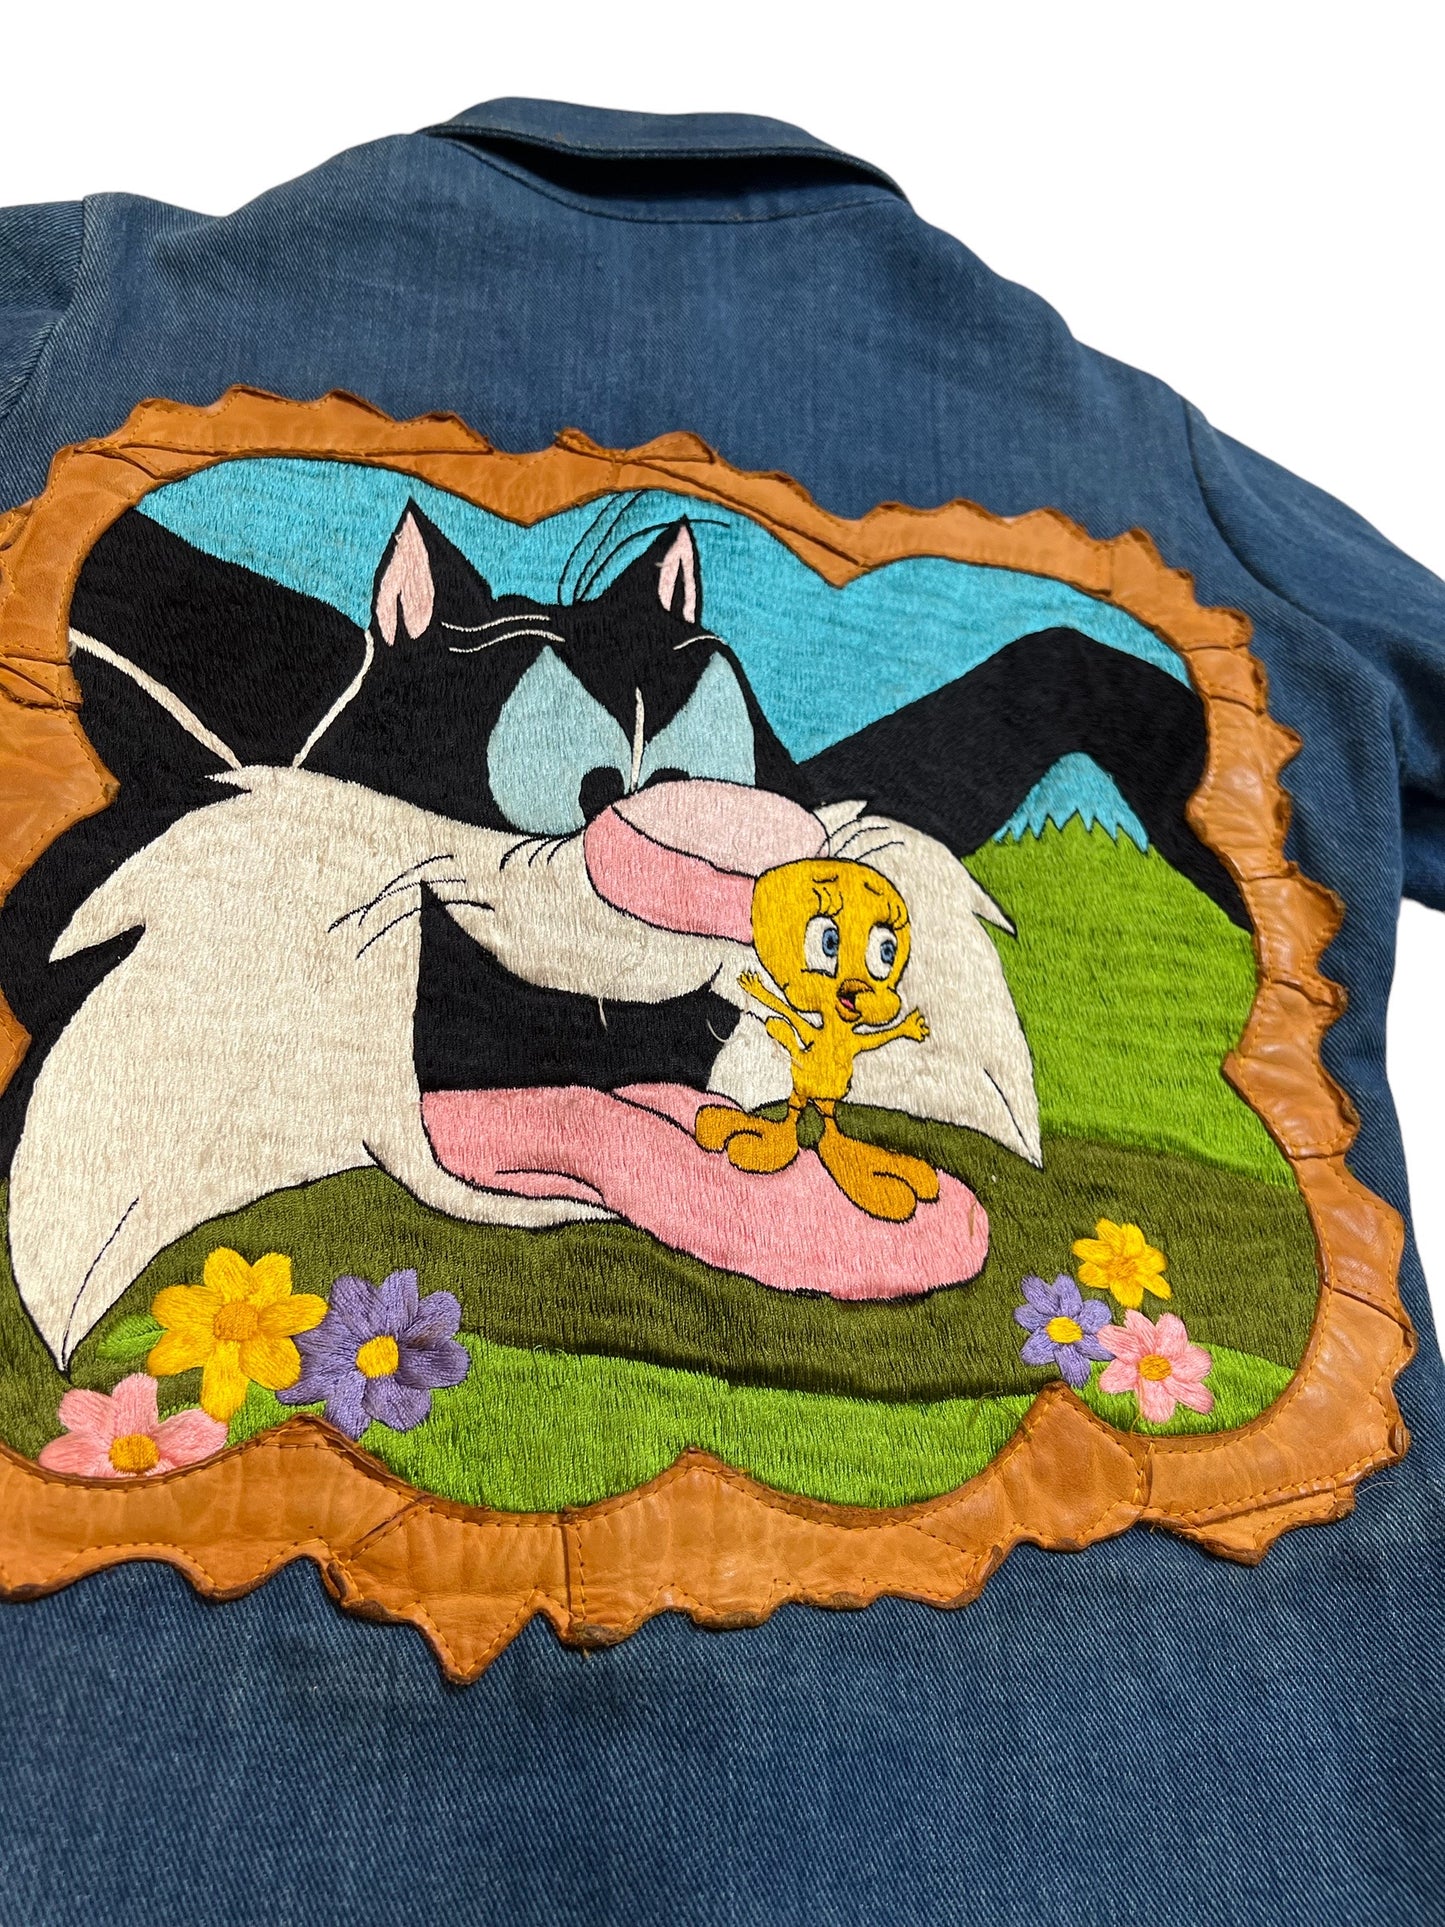 1970s Antonio Guiseppe “Sylvester & Tweety” embroidered denim/leather jacket